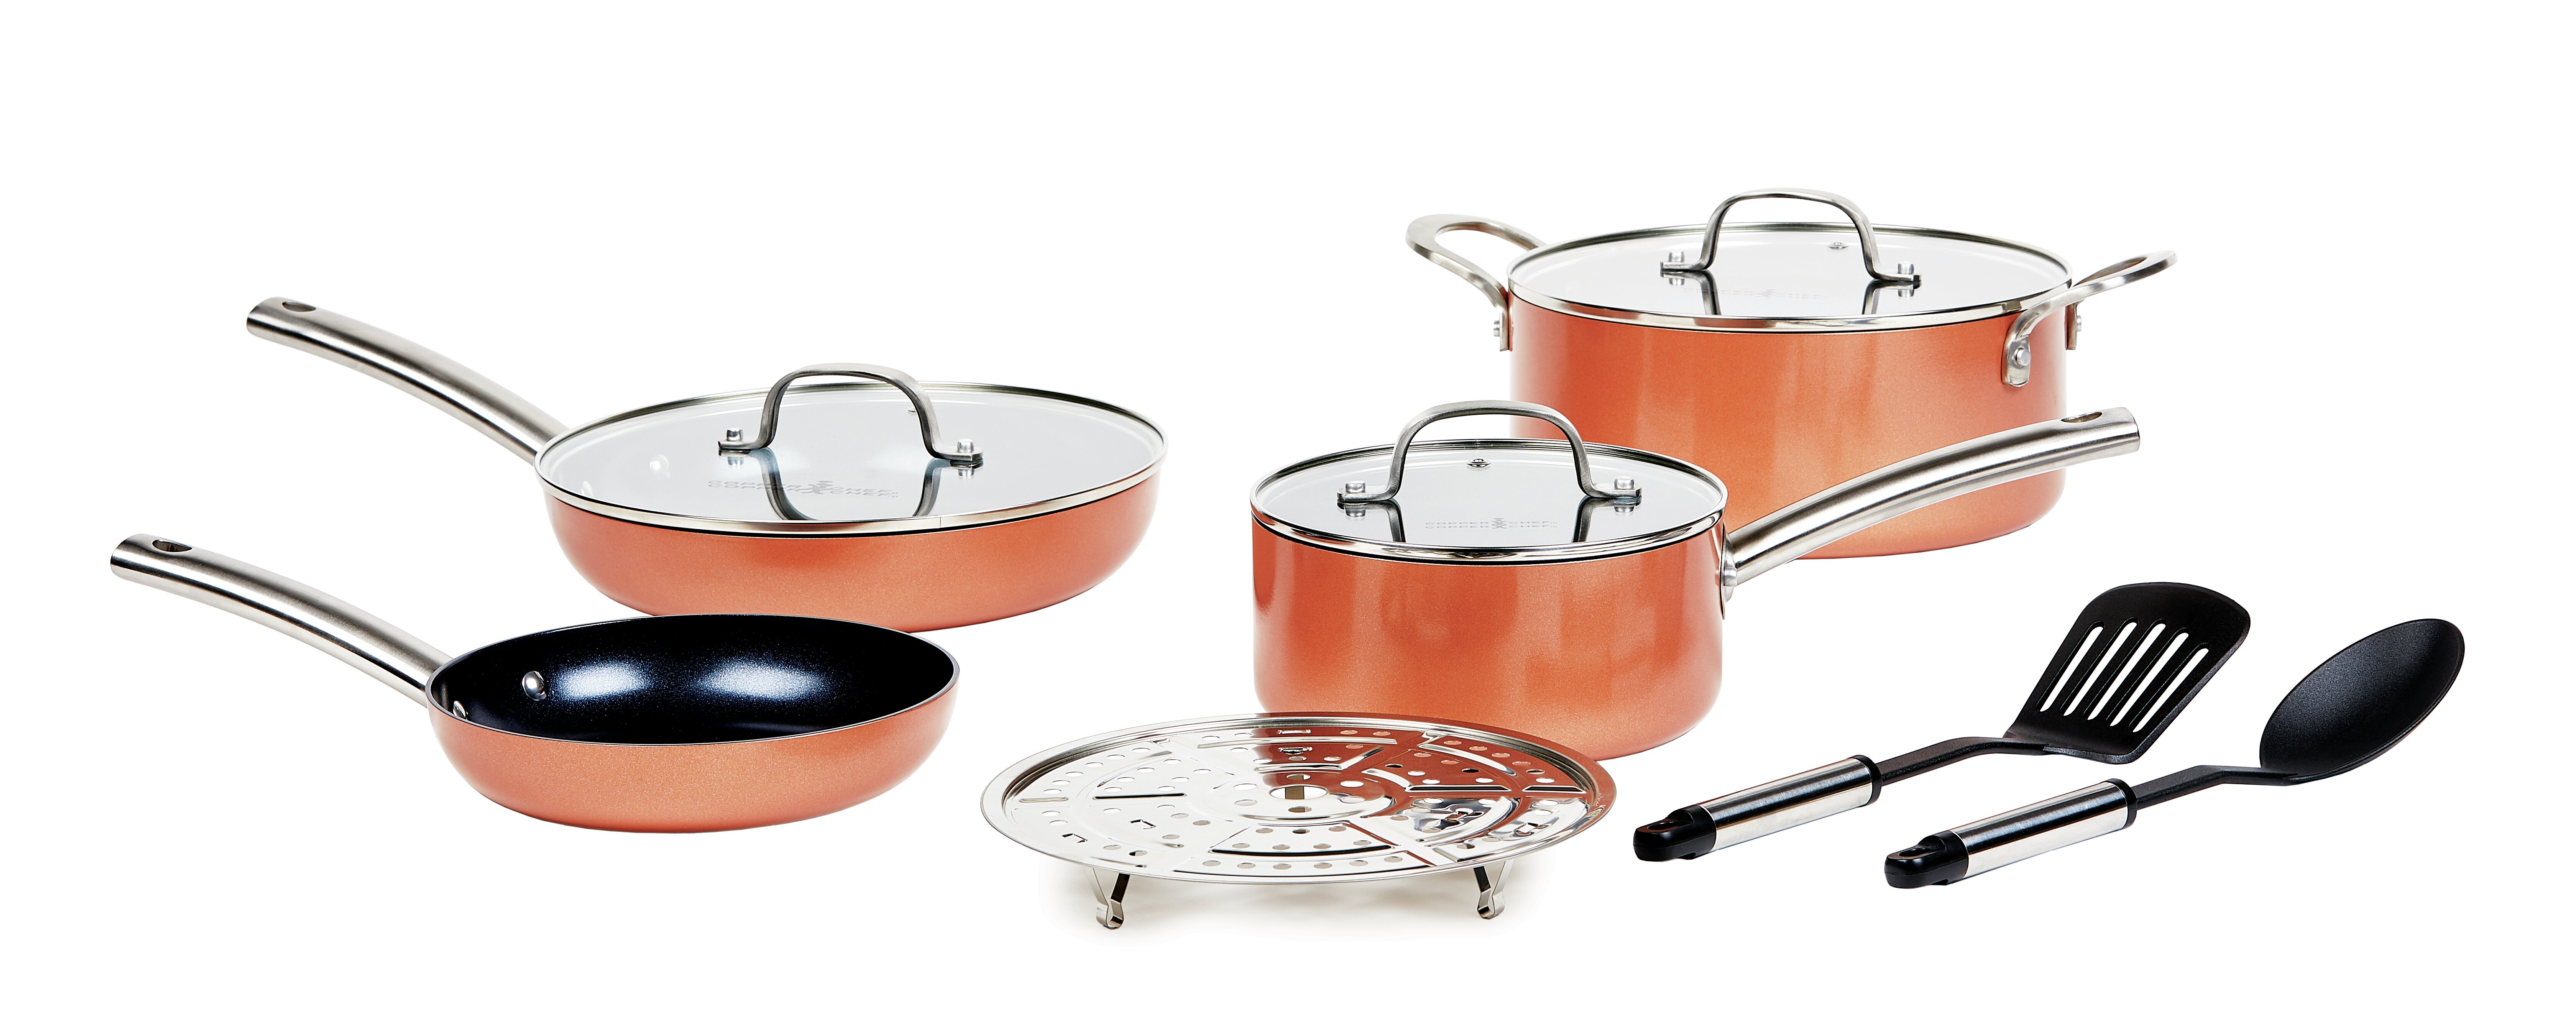 10-Piece Cookware Set Non-Stick Copper Pan Stove-top Oven Induction Electric 